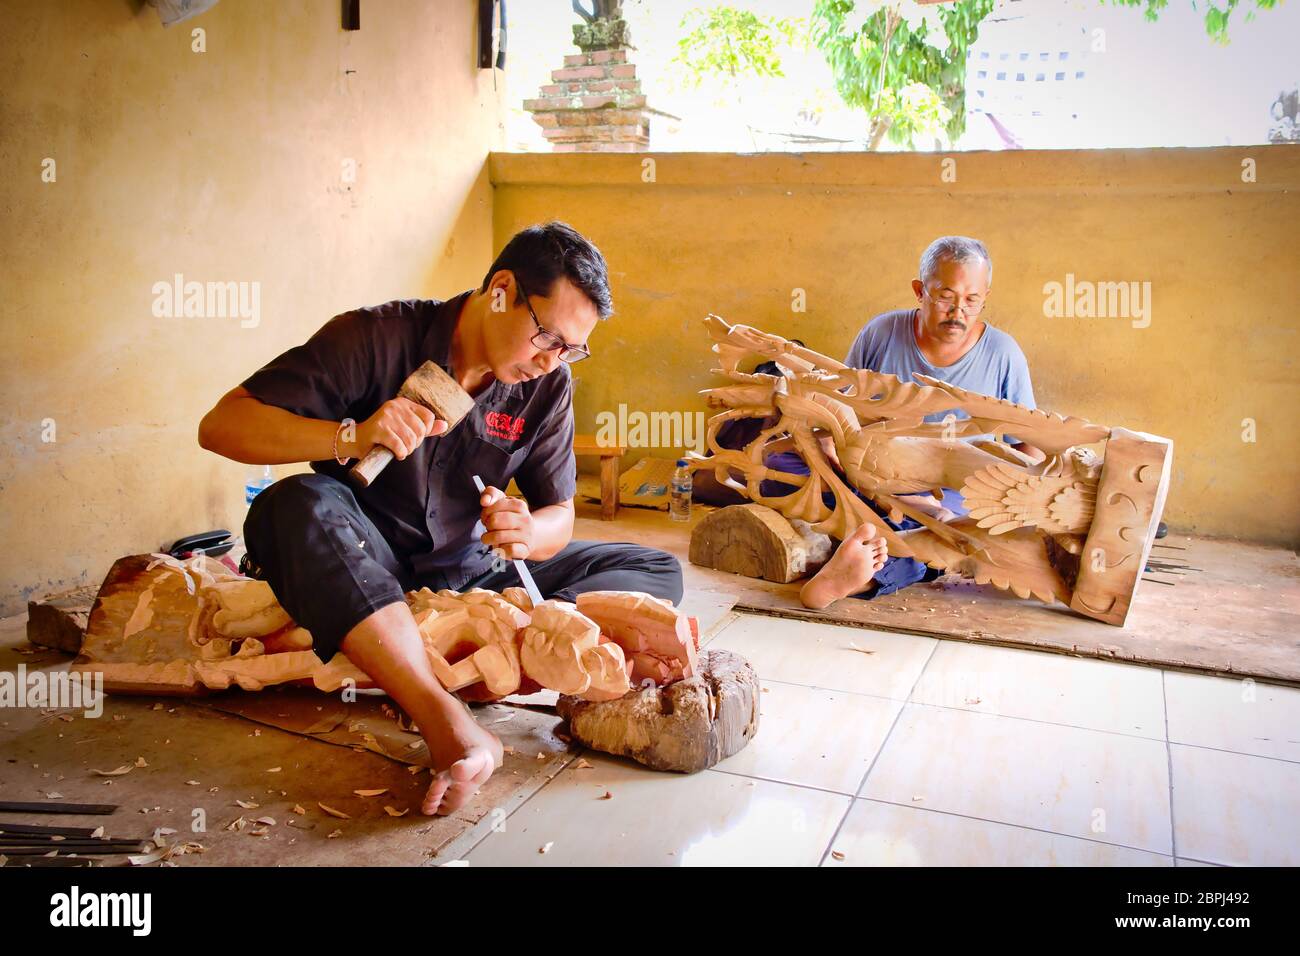 A mans is making wooden crafts in Bali Island, Indonesia Stock Photo